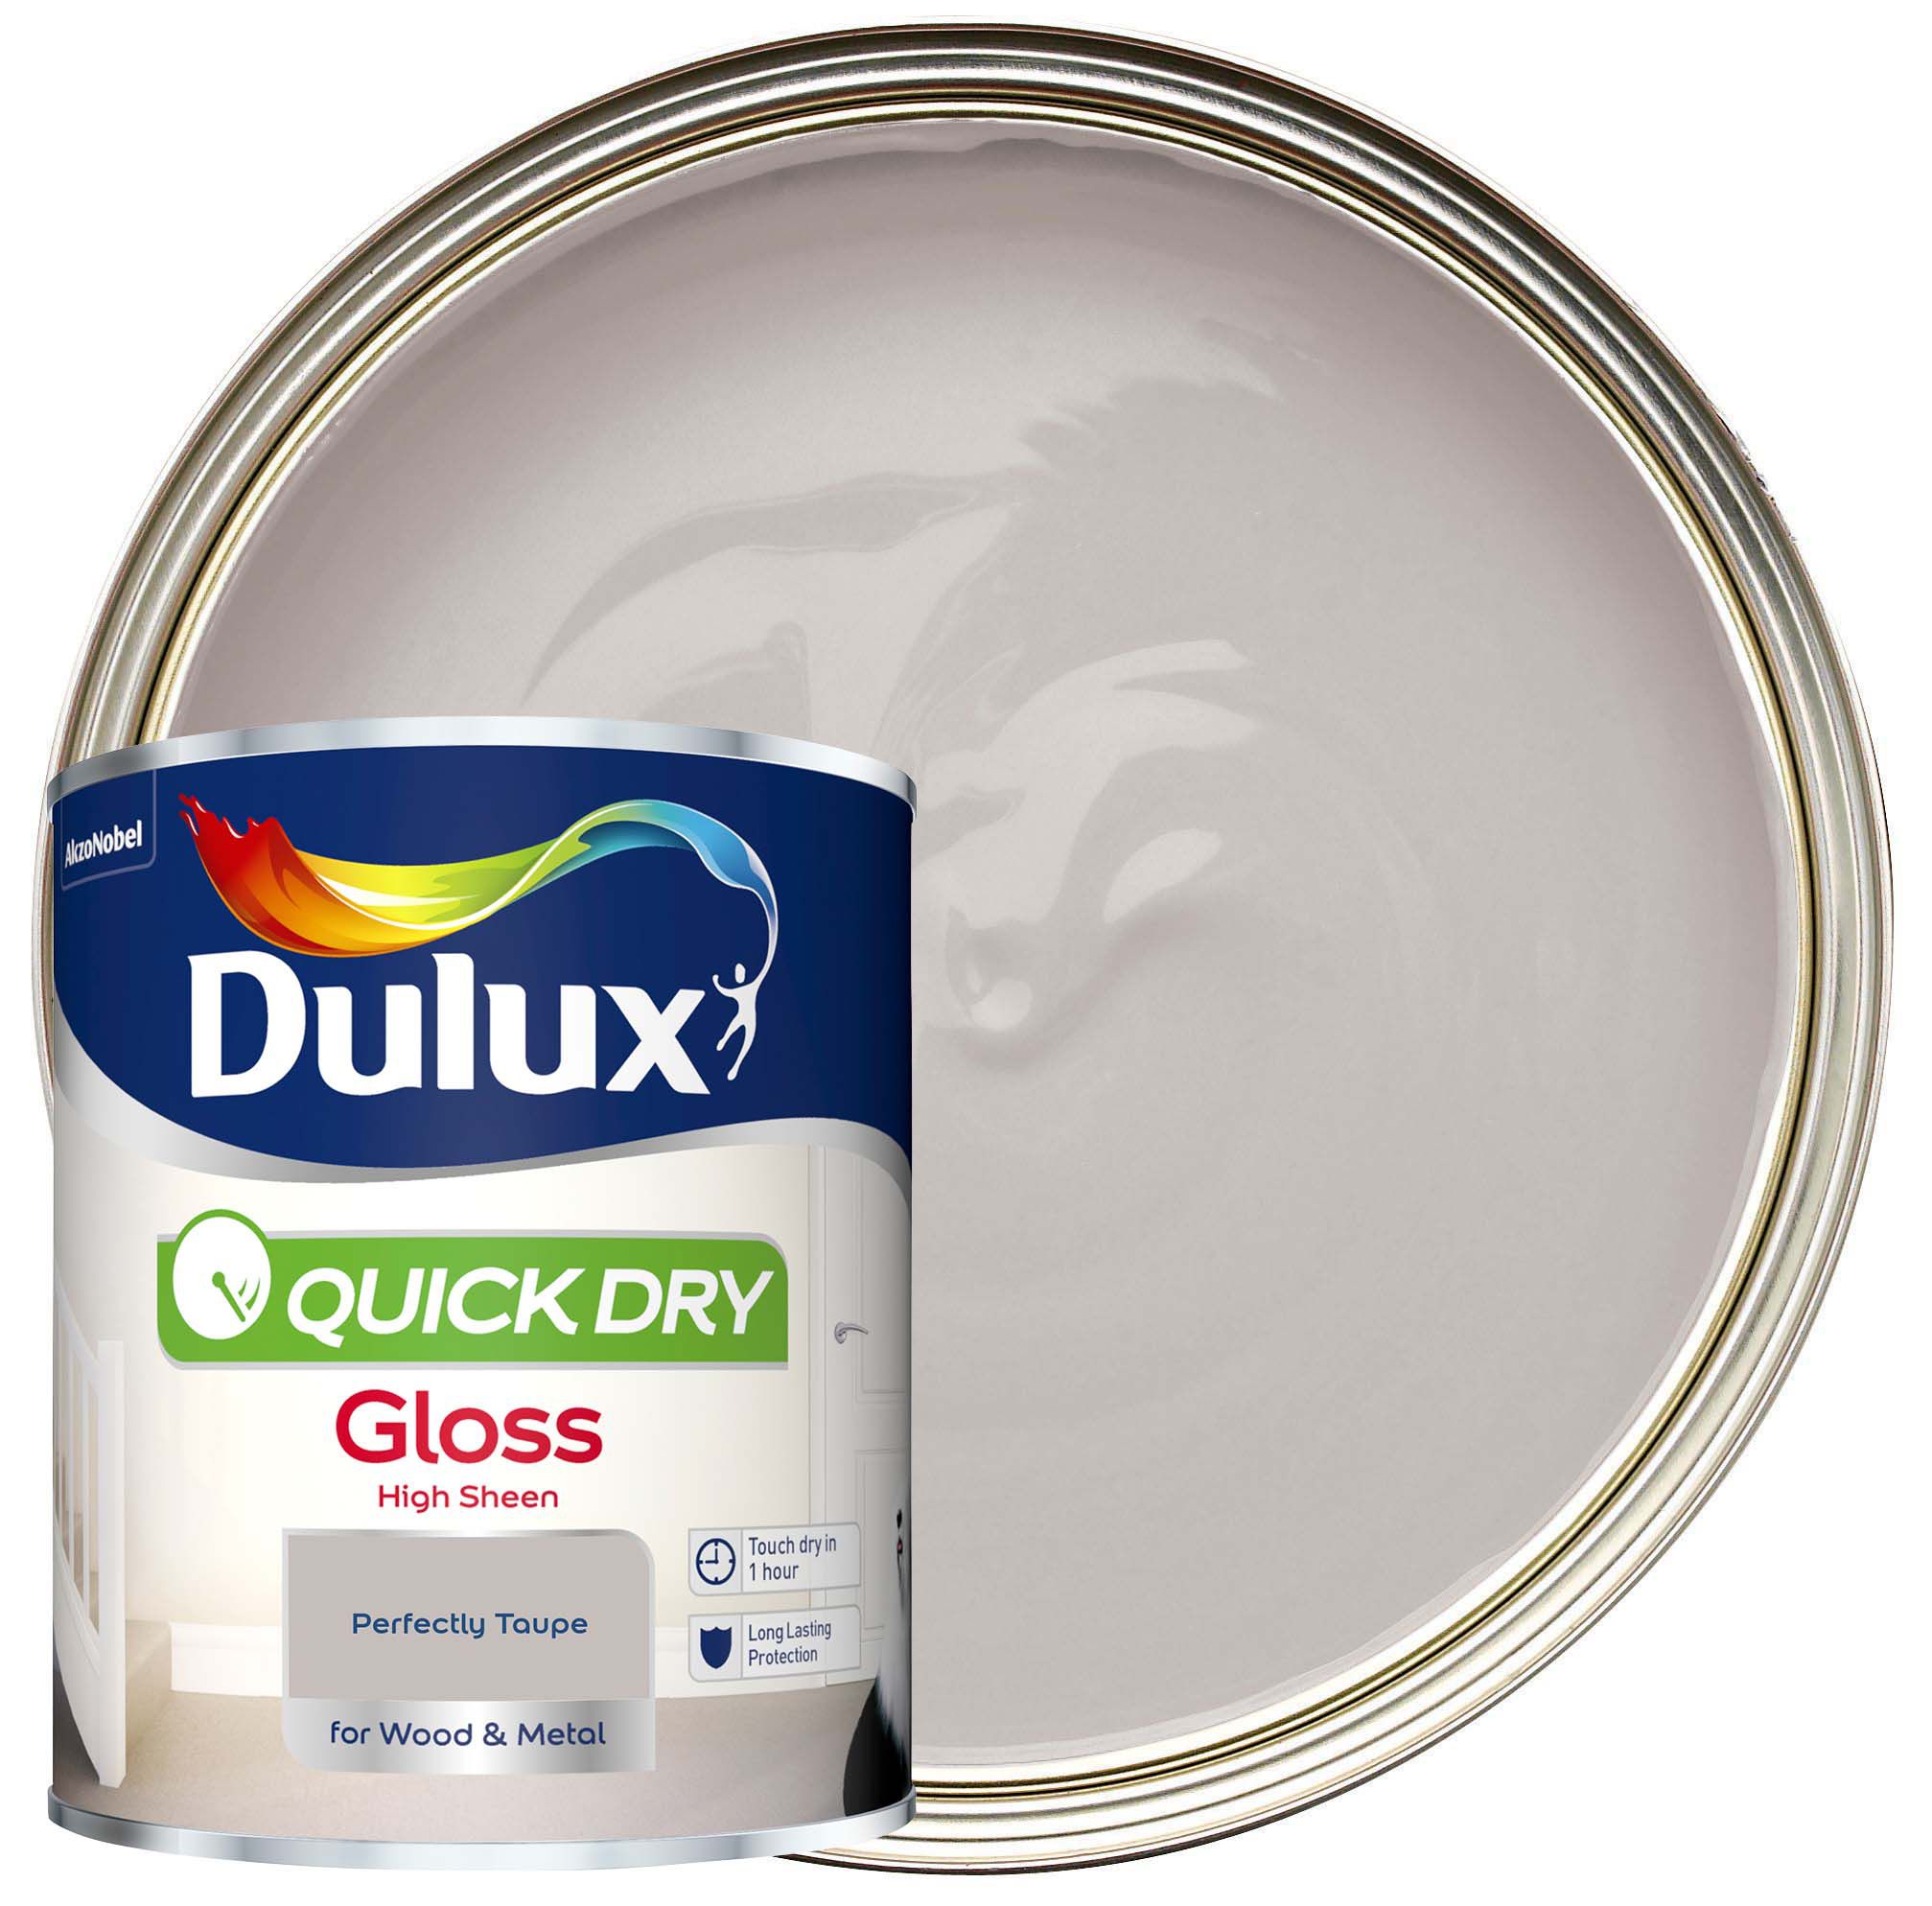 Image of Dulux Quick Drying Gloss Paint - Perfectly Taupe - 750ml